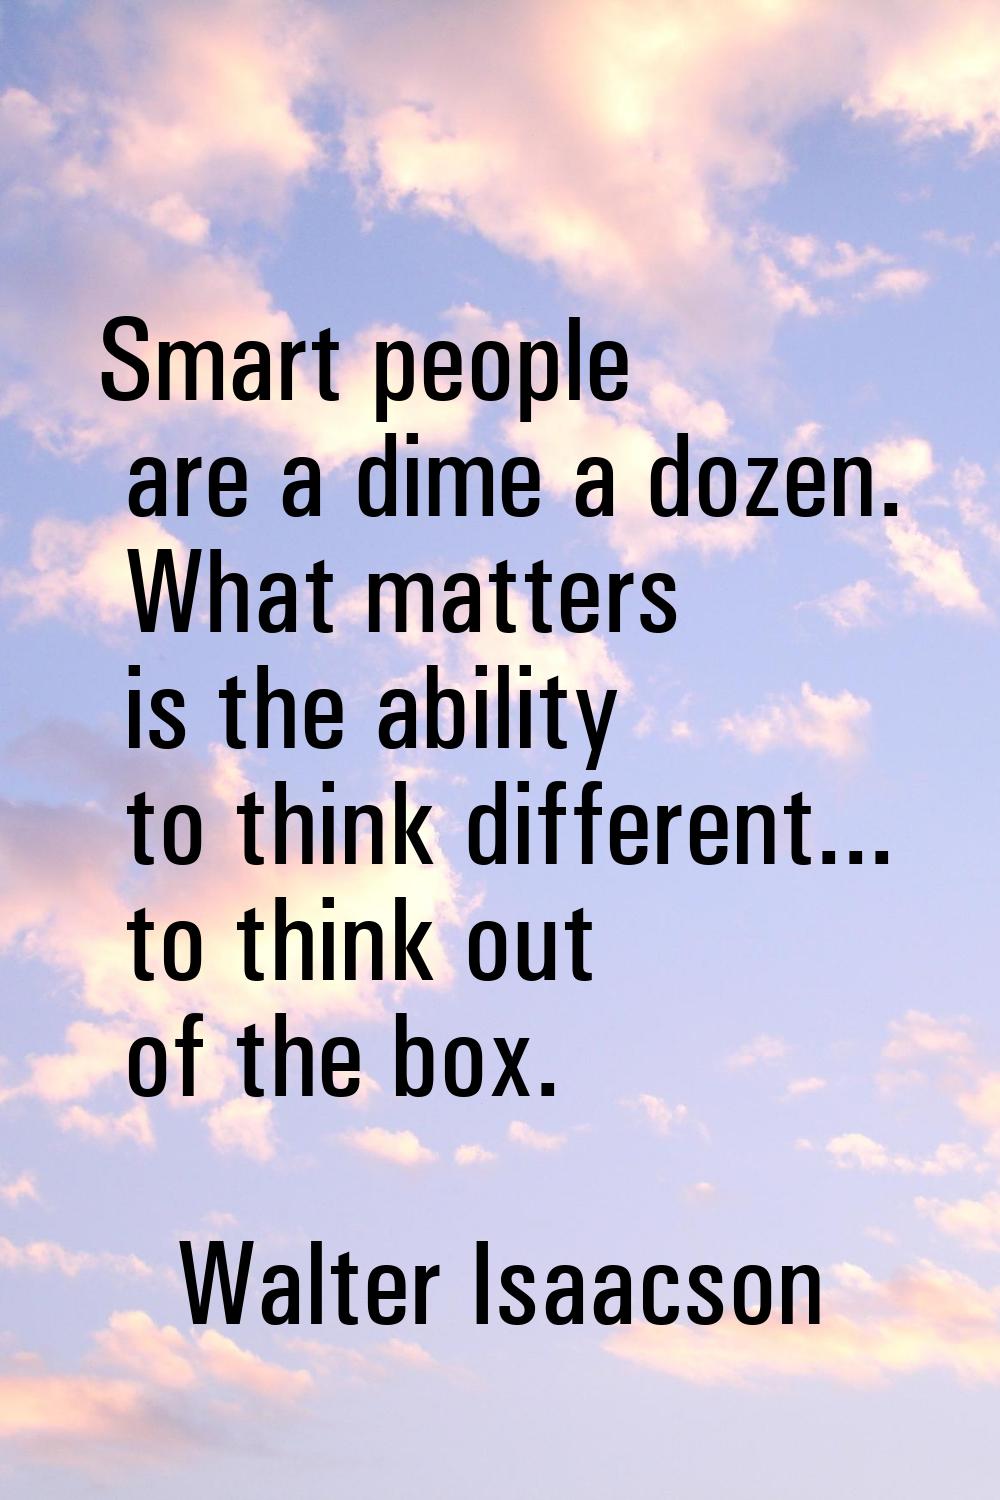 Smart people are a dime a dozen. What matters is the ability to think different... to think out of 